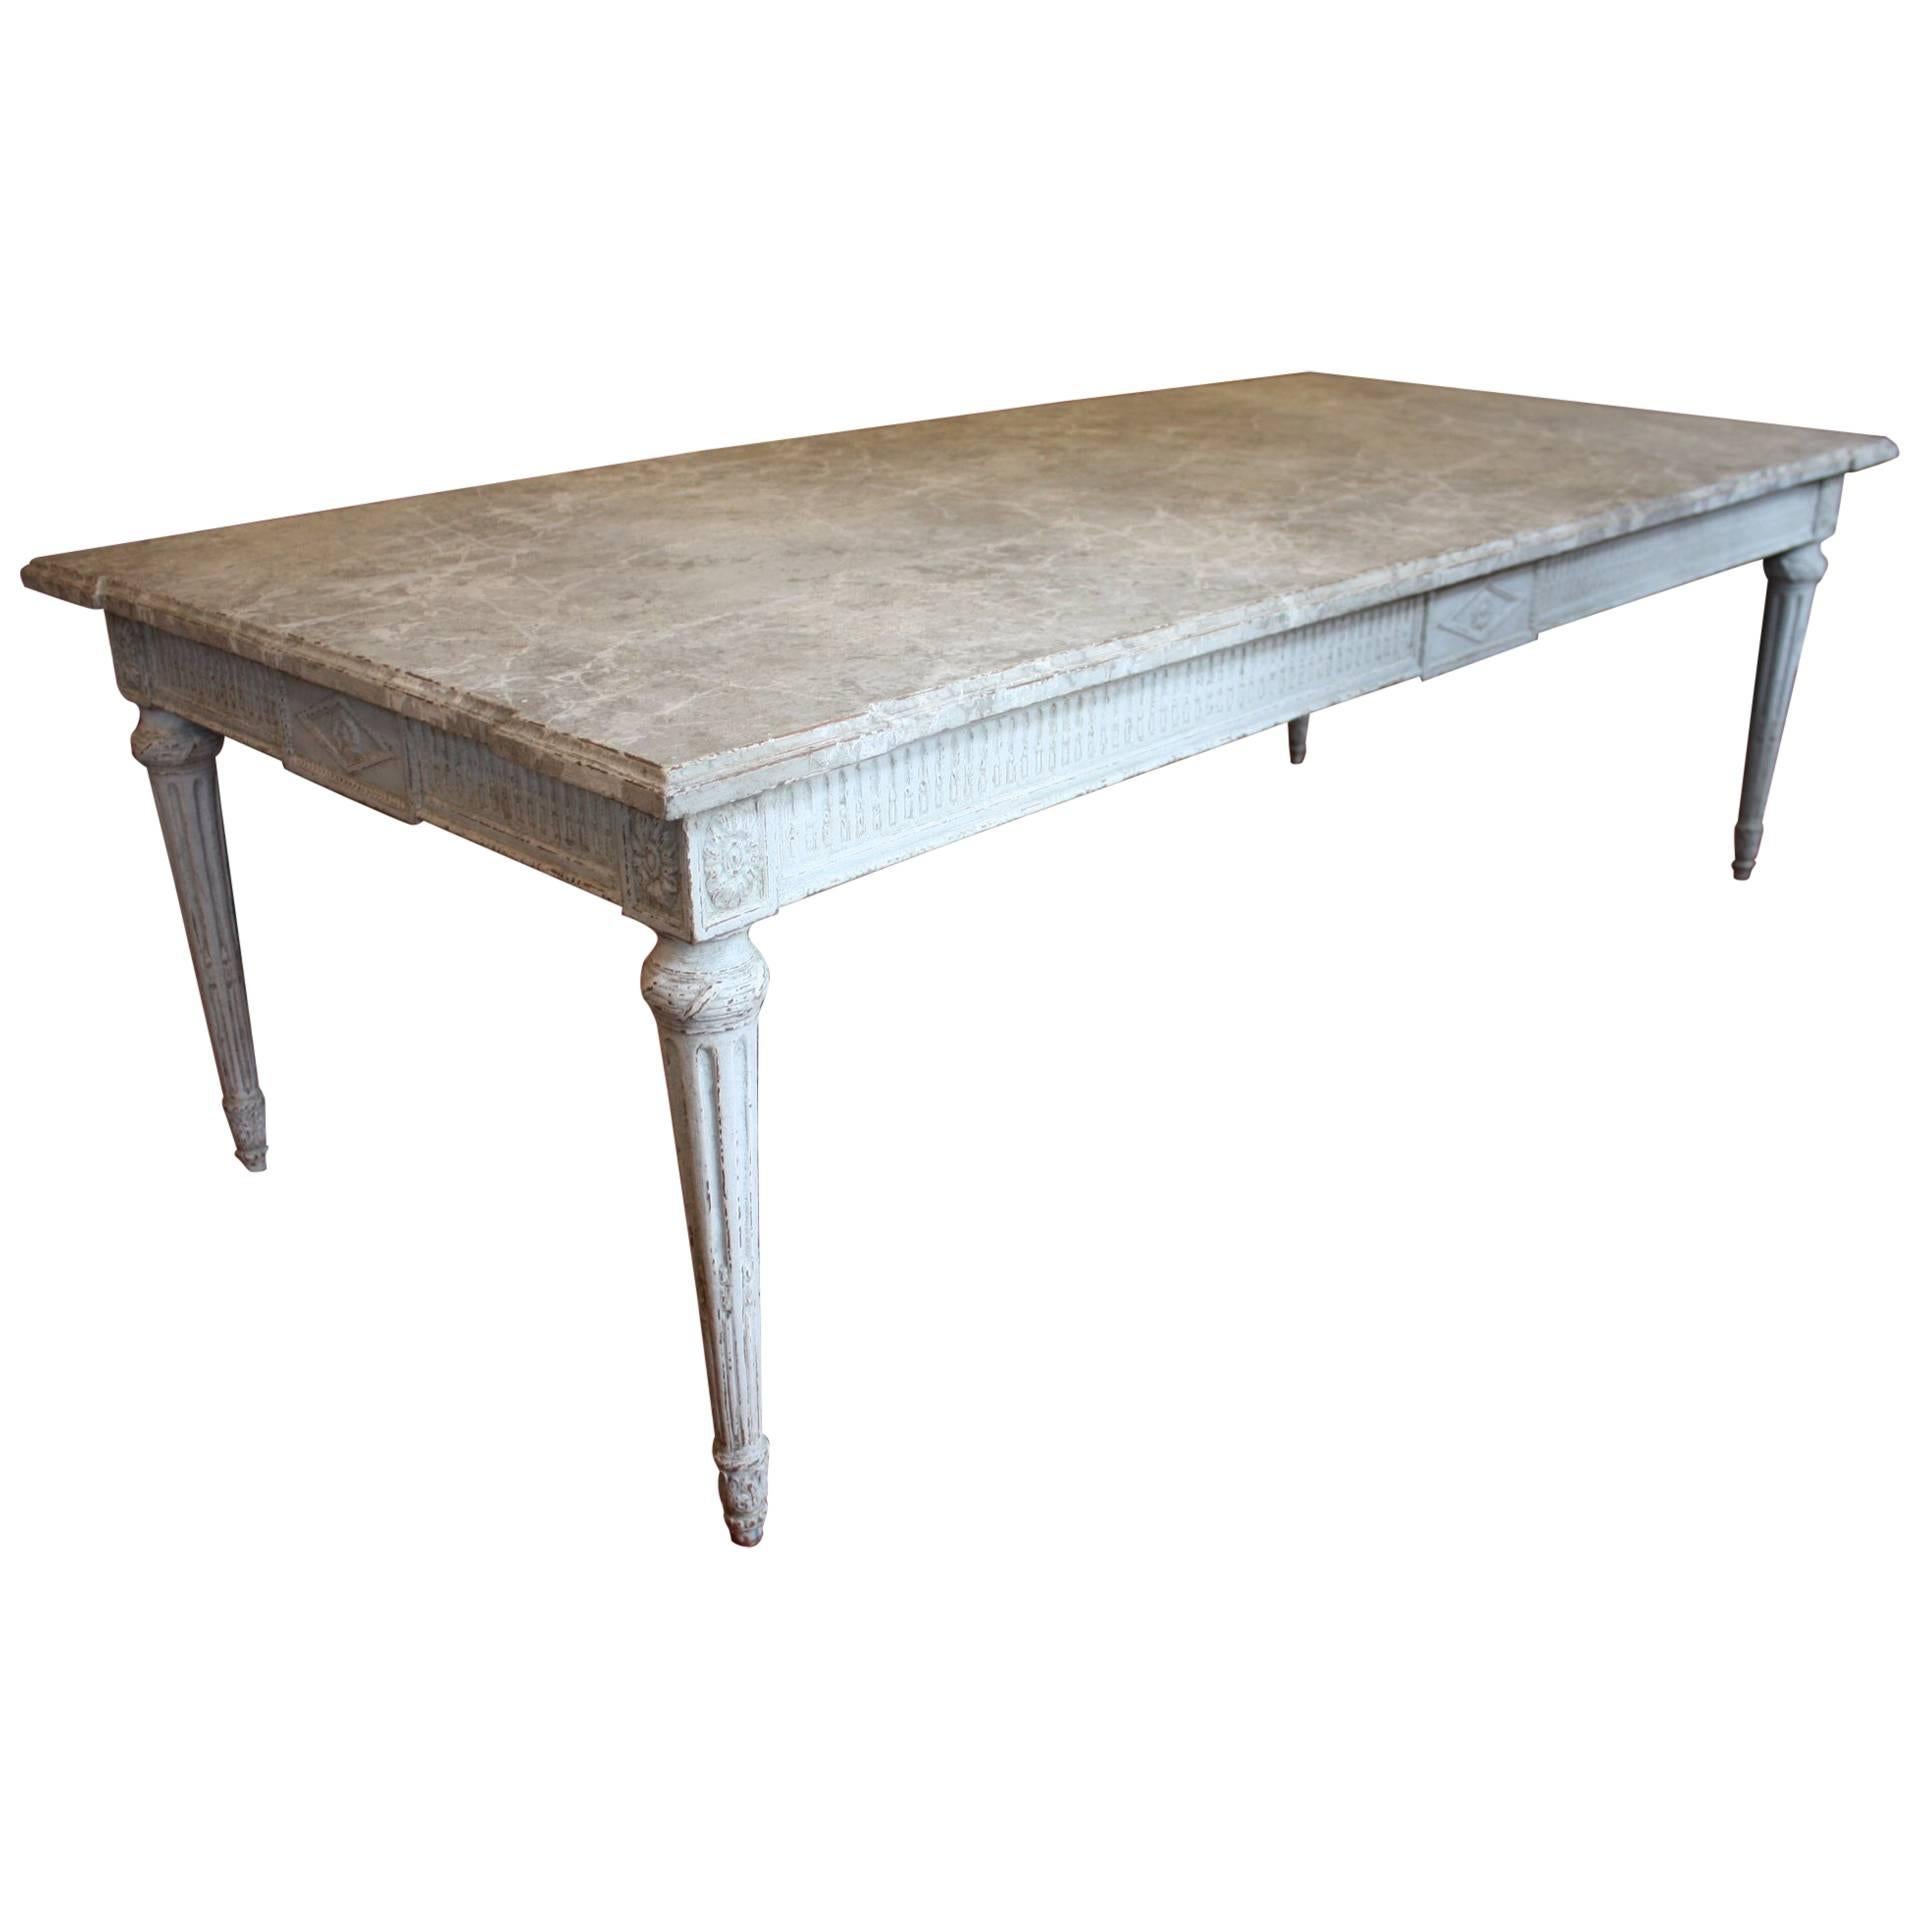 19th Century French Painted Dining Room Table with Faux Marble Top